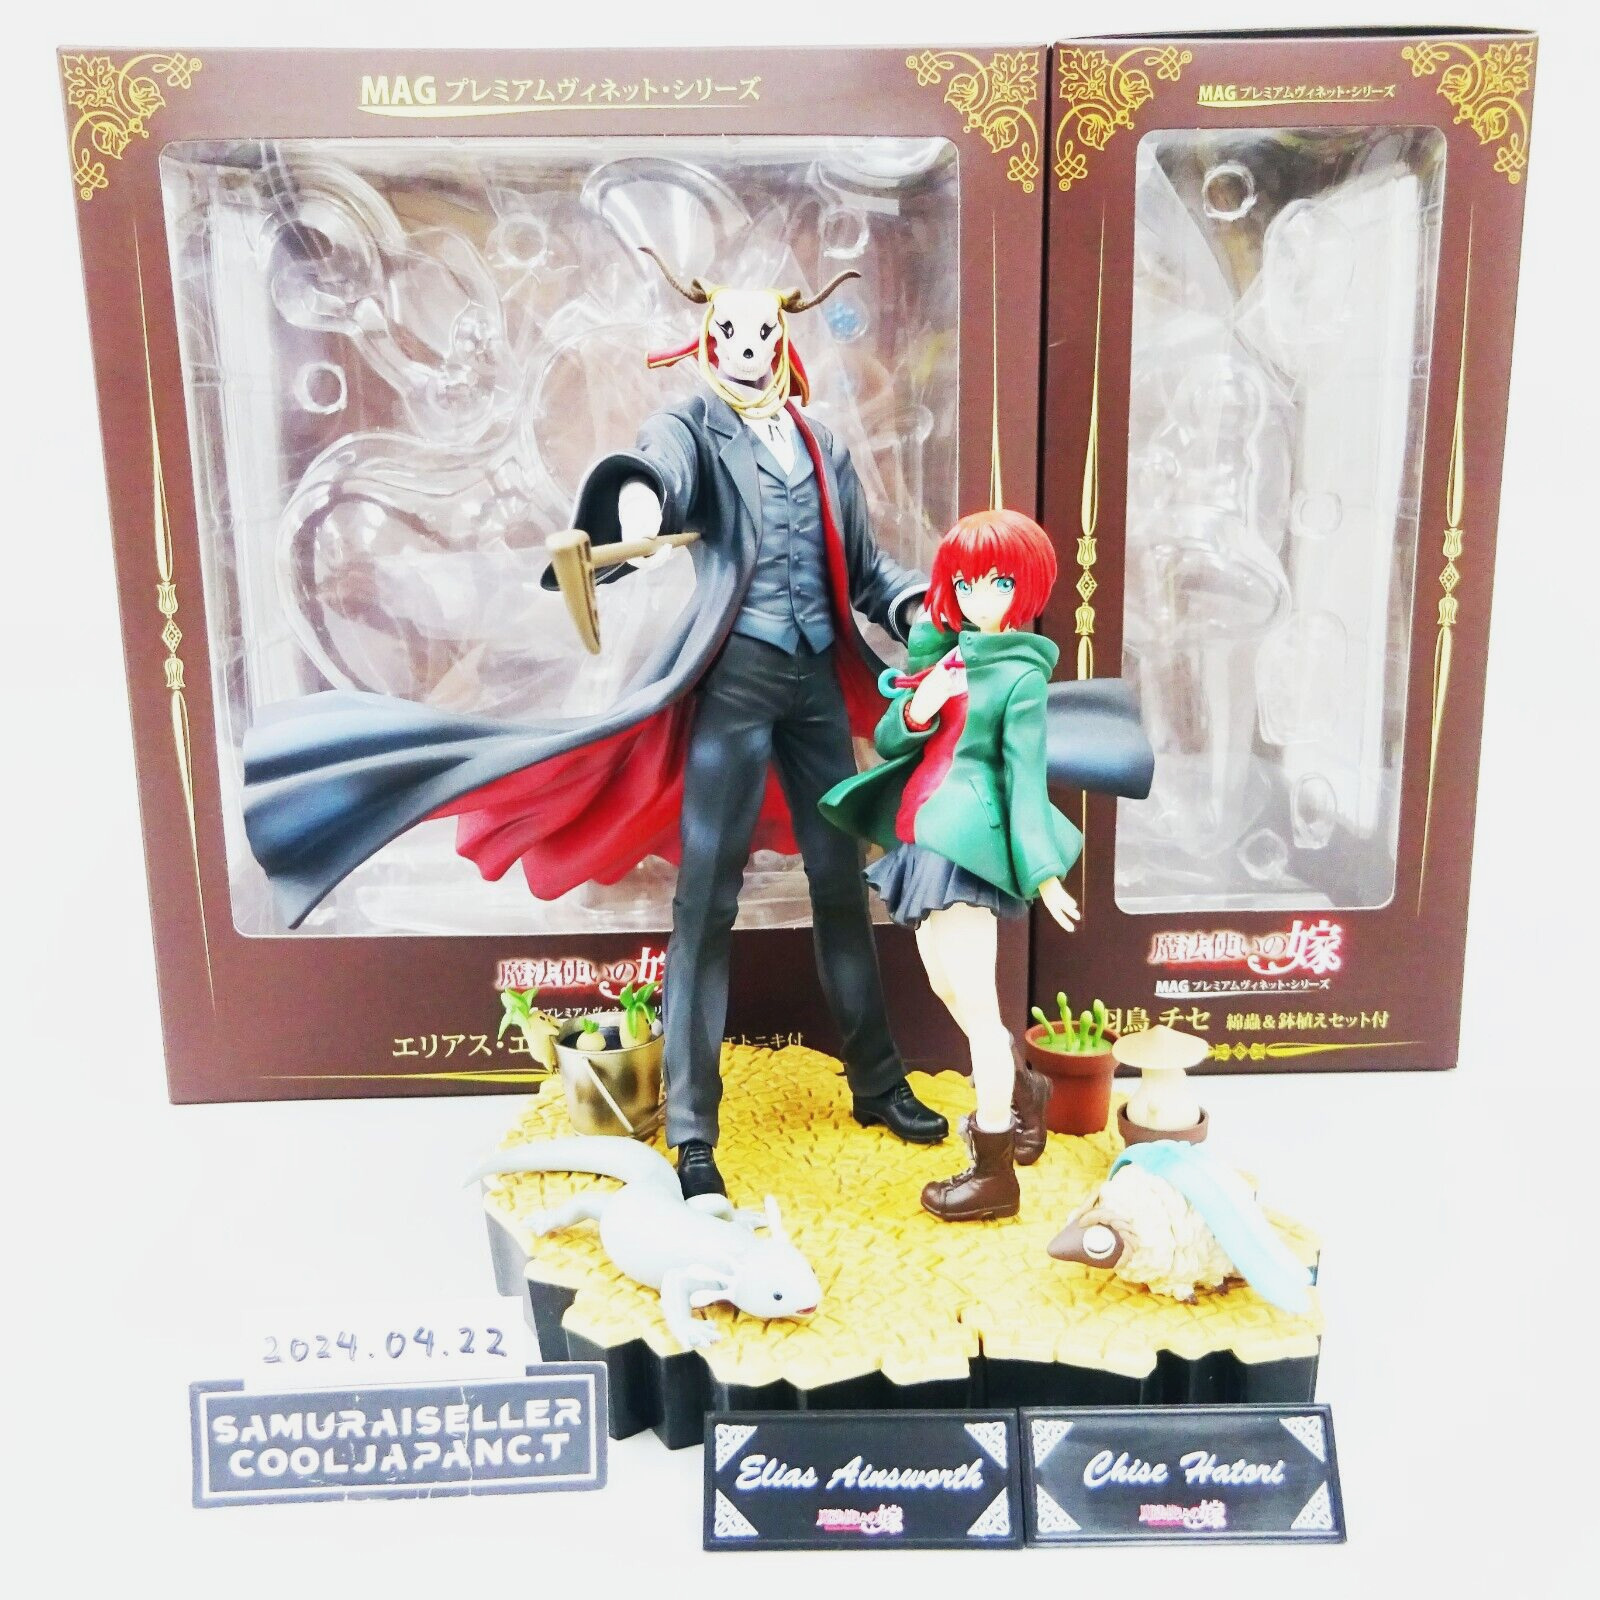 The Ancient Magus Bride Elias Ainsworth and Chise Hatori PVC FIgure Japan Used